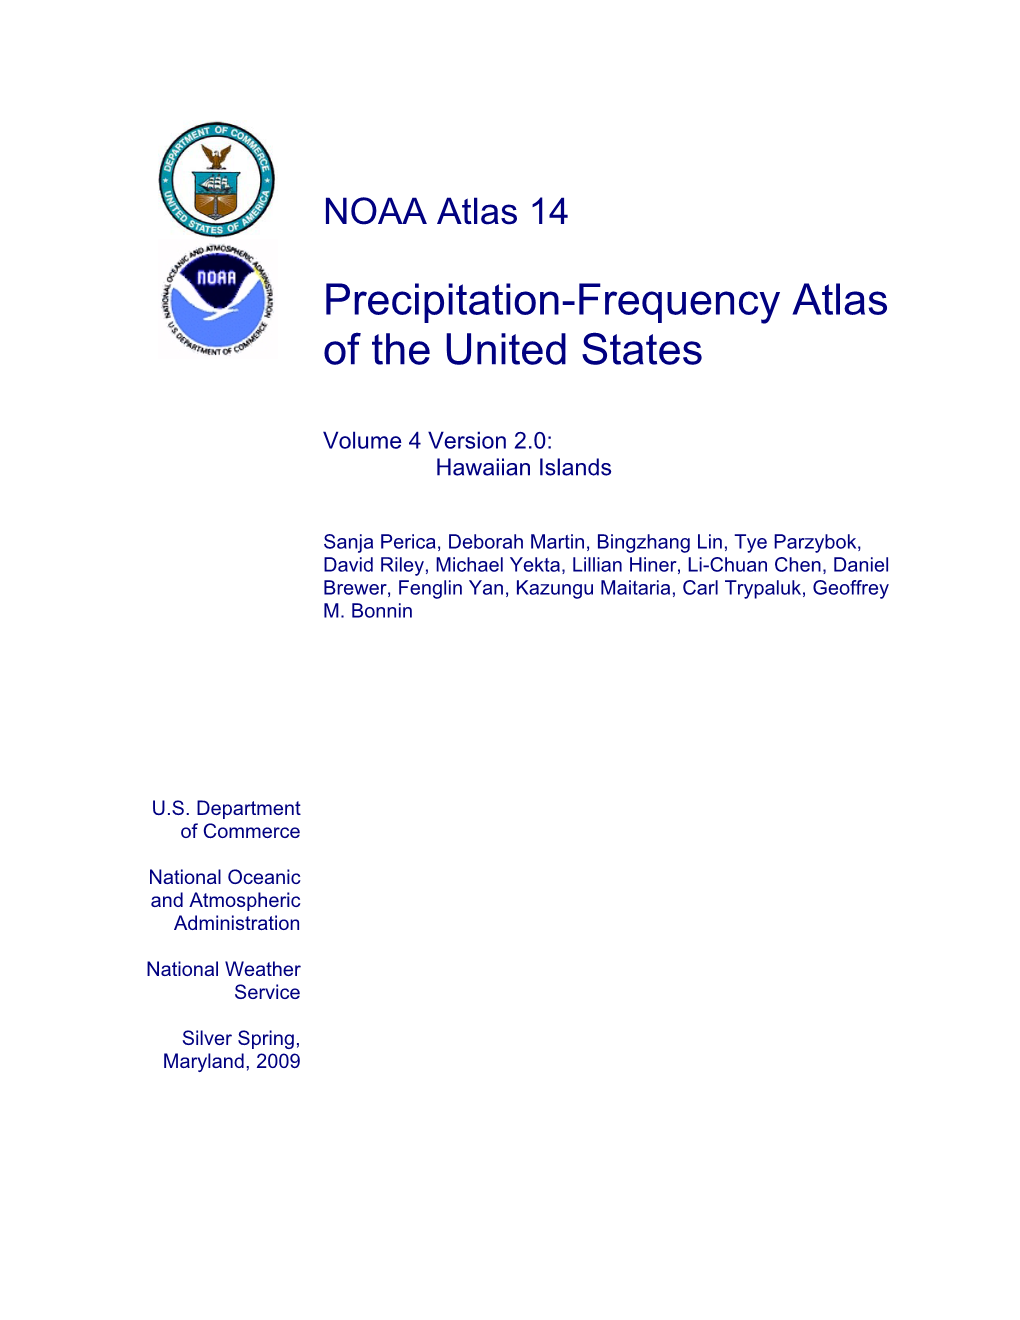 Precipitation-Frequency Atlas of the United States